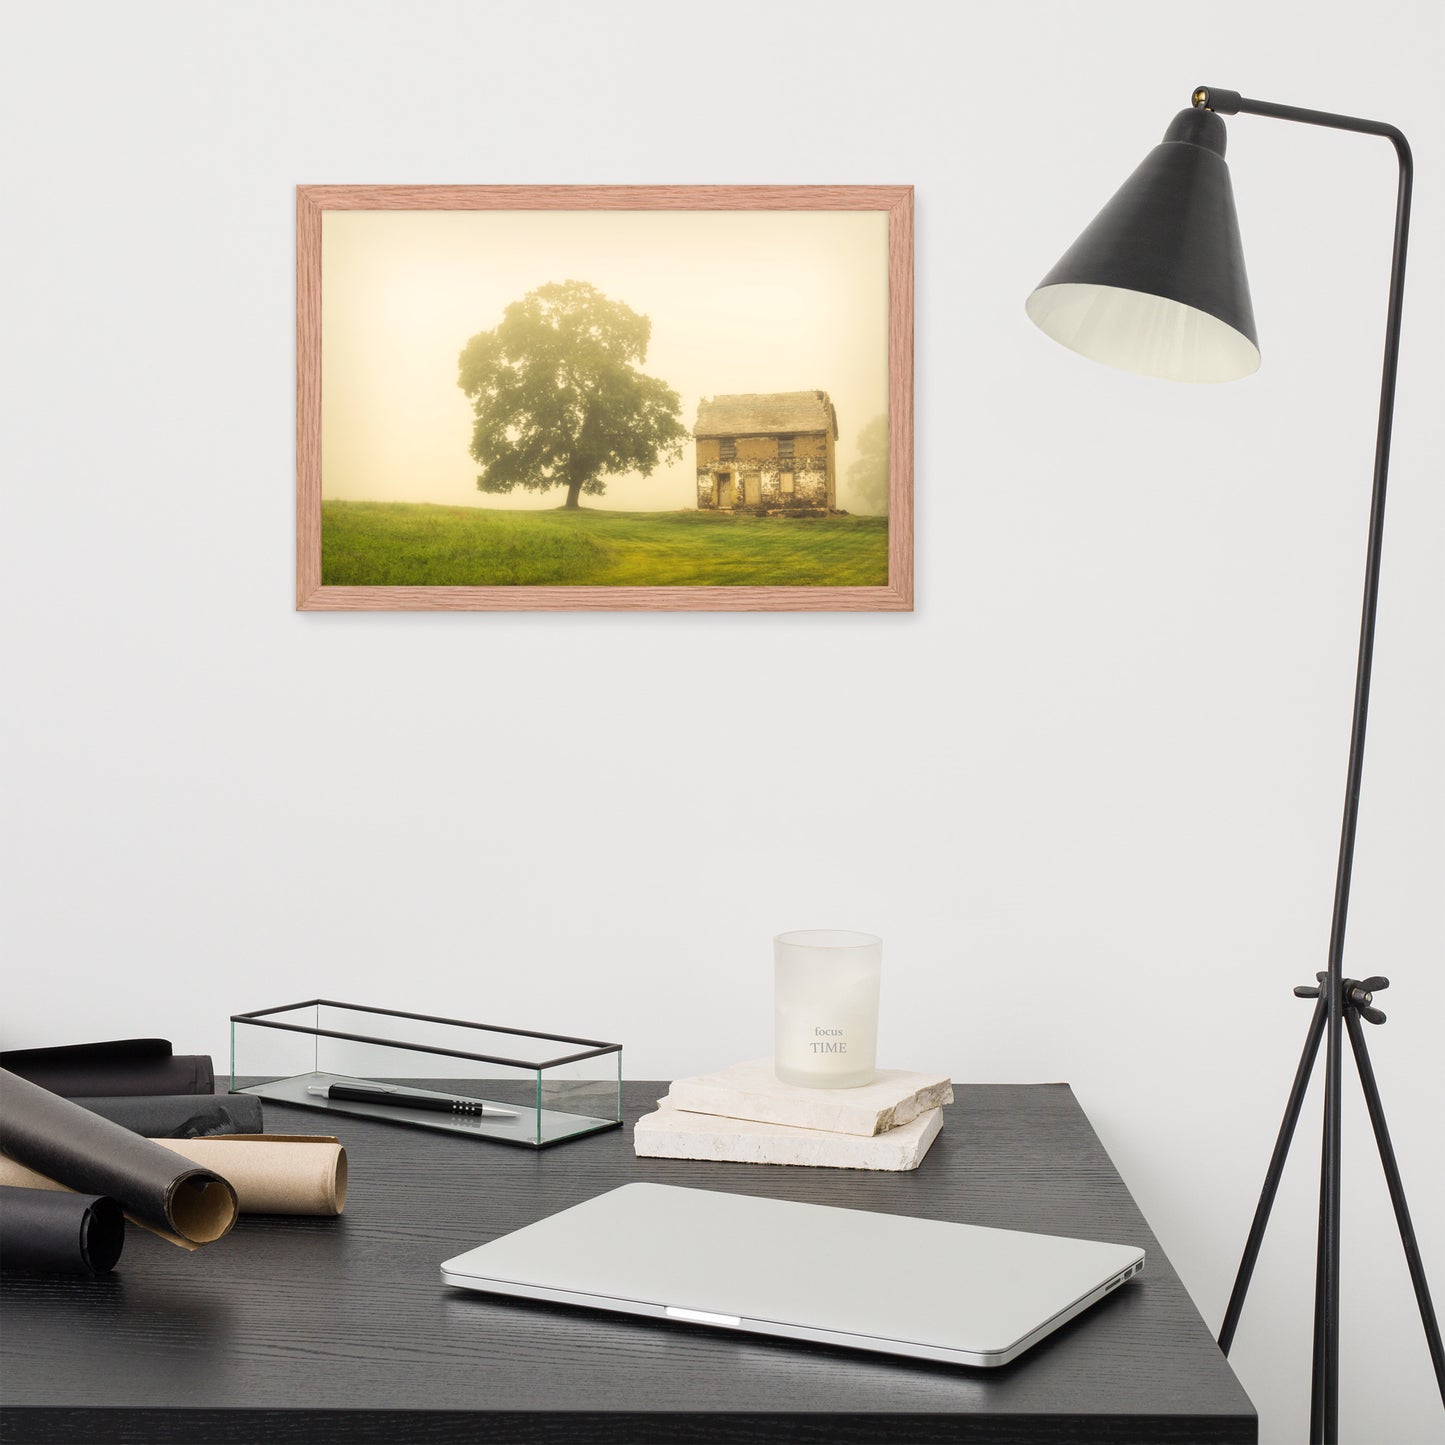 Office Art Prints: Abandoned House - Rustic / Rural / Country Style Landscape / Nature Framed Photo Paper Wall Art Prints - Artwork - Wall Decor